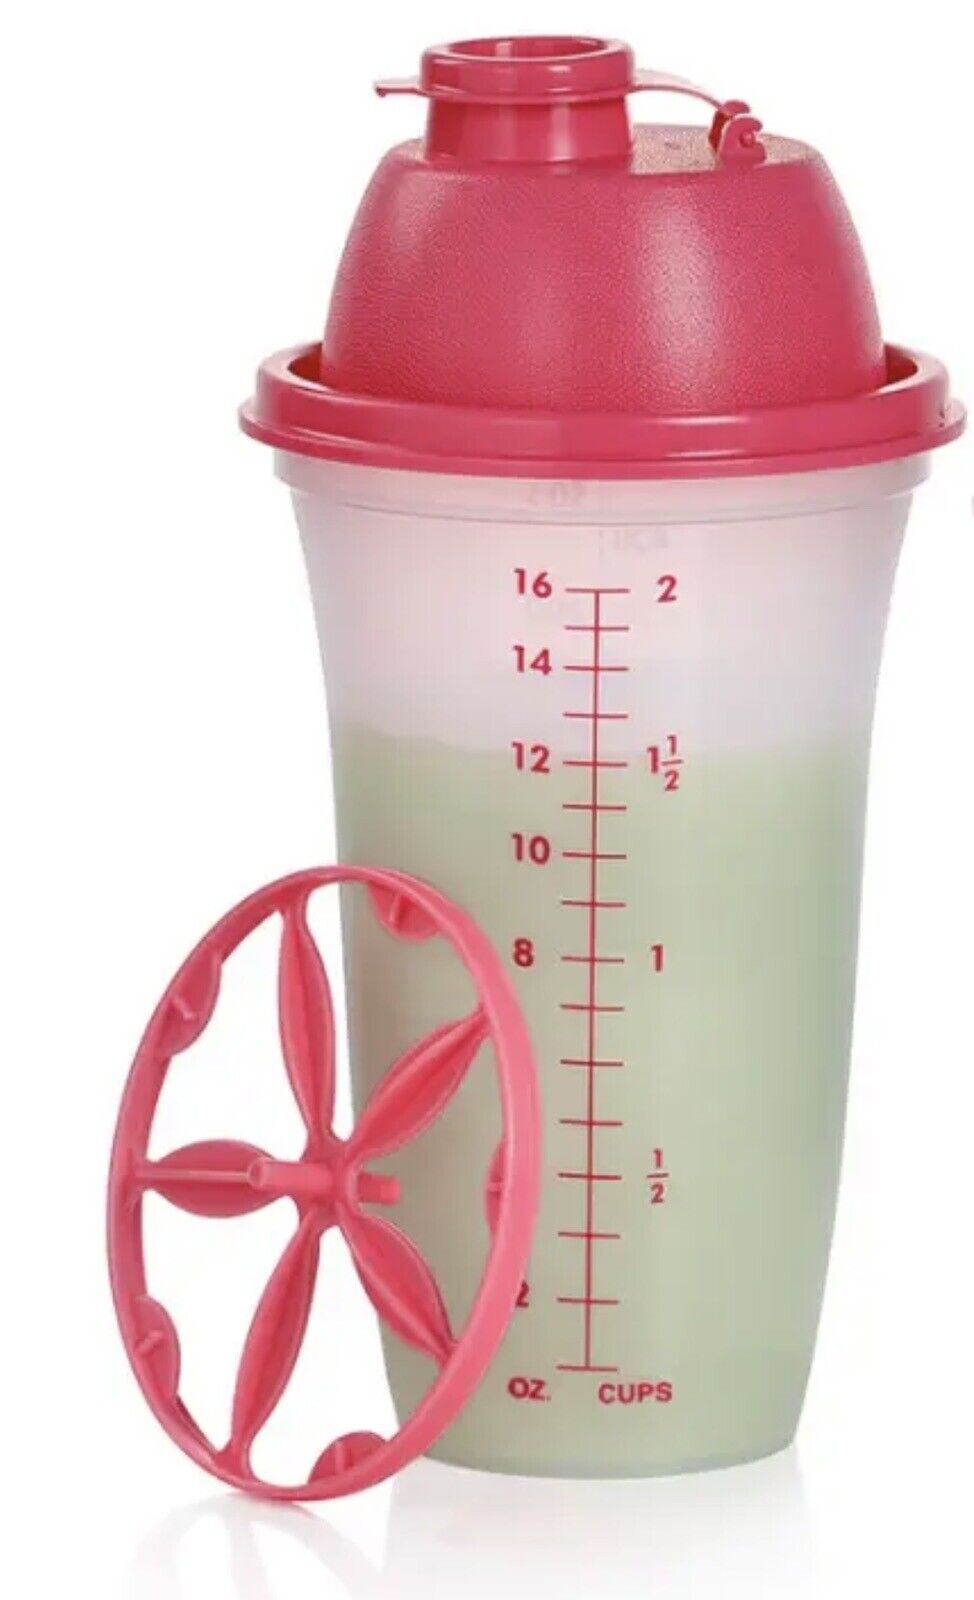 Tupperware New Classic Quick Shake Container 2 cups 16 oz with Blender Disc